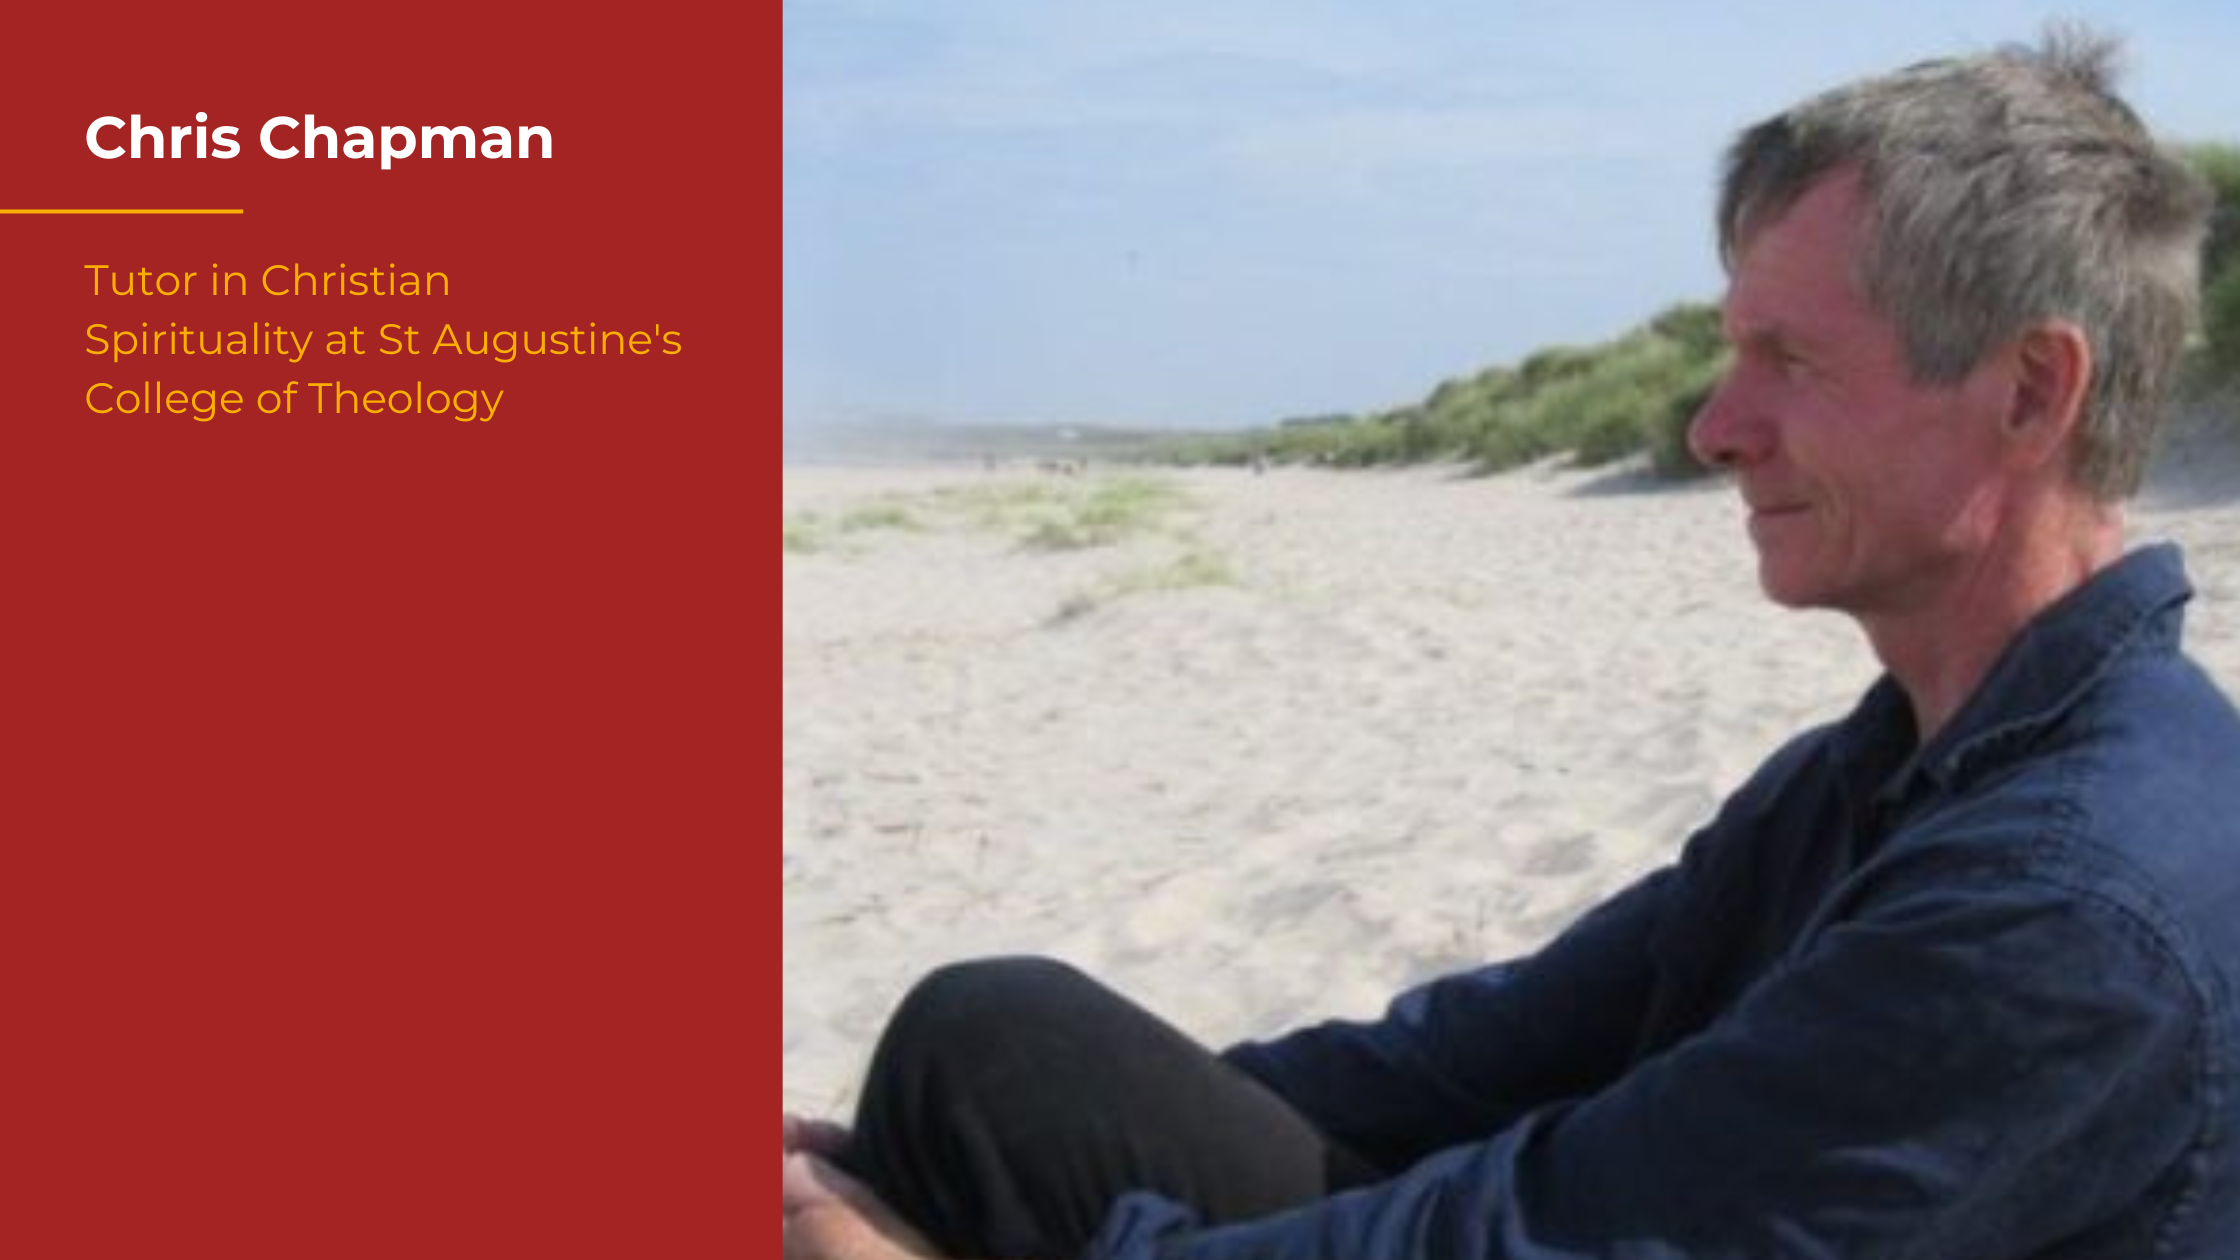 A side profile photograph of Chris, a white man with short salt and pepper hair and a thoughtful expression. He is sitting on a beach with sand dunes behind him. He is wearing a dark blue shirt and black trousers. Next to the photo is a red banner that reads "Chris Chapman, Tutor in Christian Spirituality at St Augustine's College of Theology".